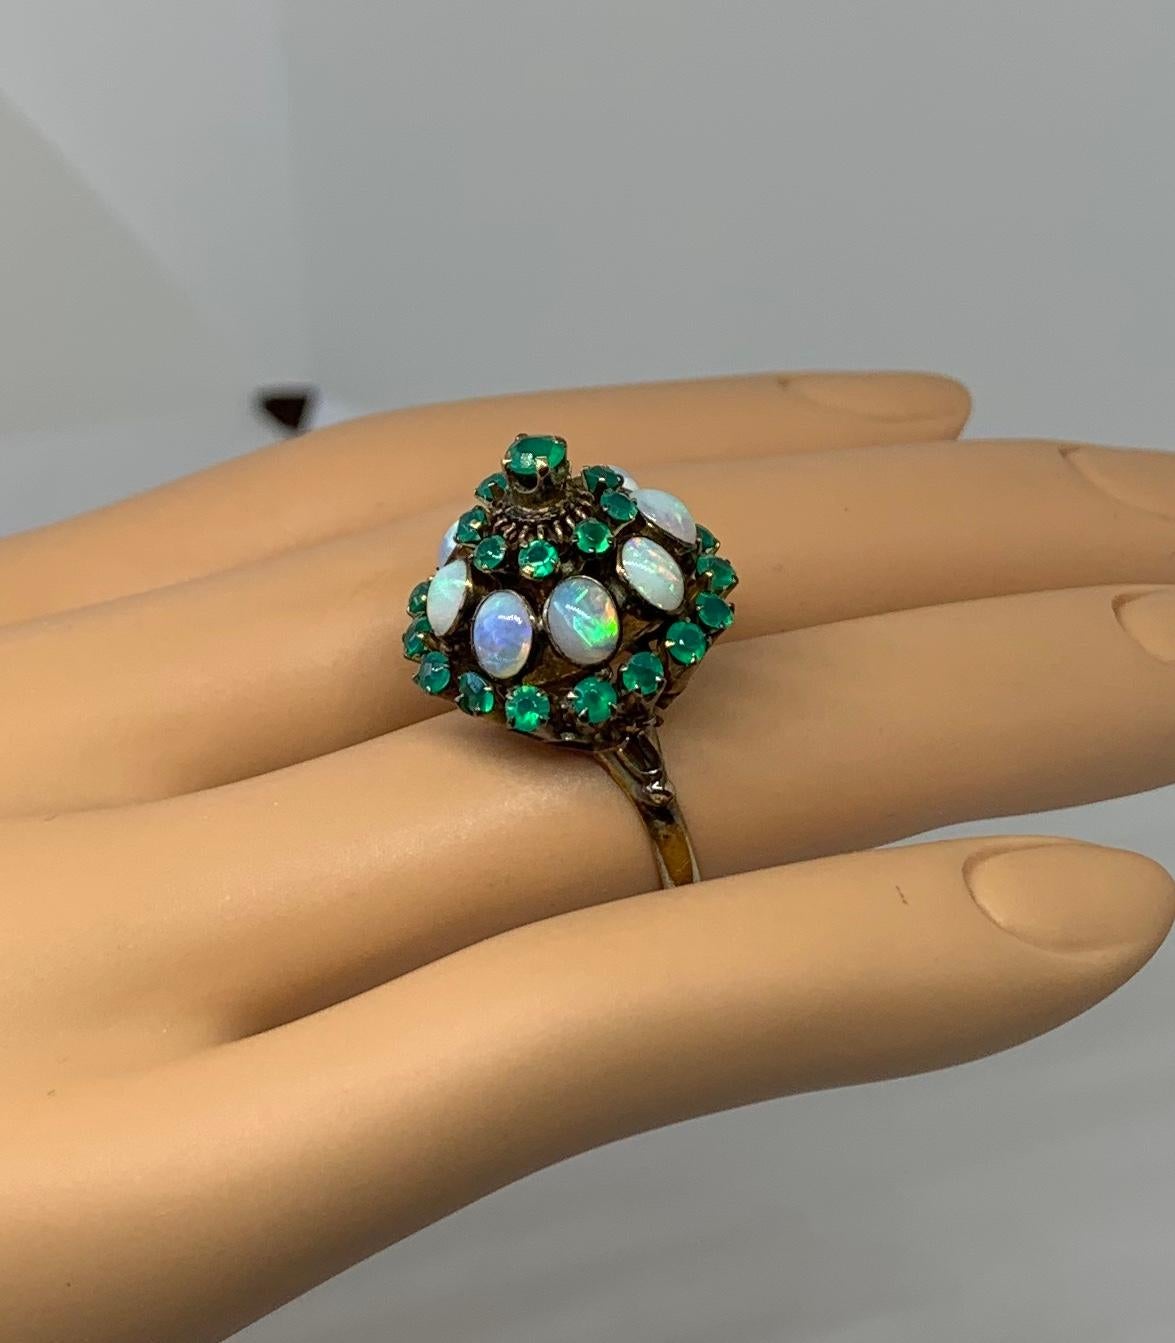 THIS IS A WONDERFUL ART DECO OPAL AND EMERALD PRINCESS RING OF GREAT BEAUTY.
The ring is a tall bombe princess ring.  It is set with eight magnificent opals.   Along with the opals are 25 sparkling green emeralds.  The effect of the gorgeous natural